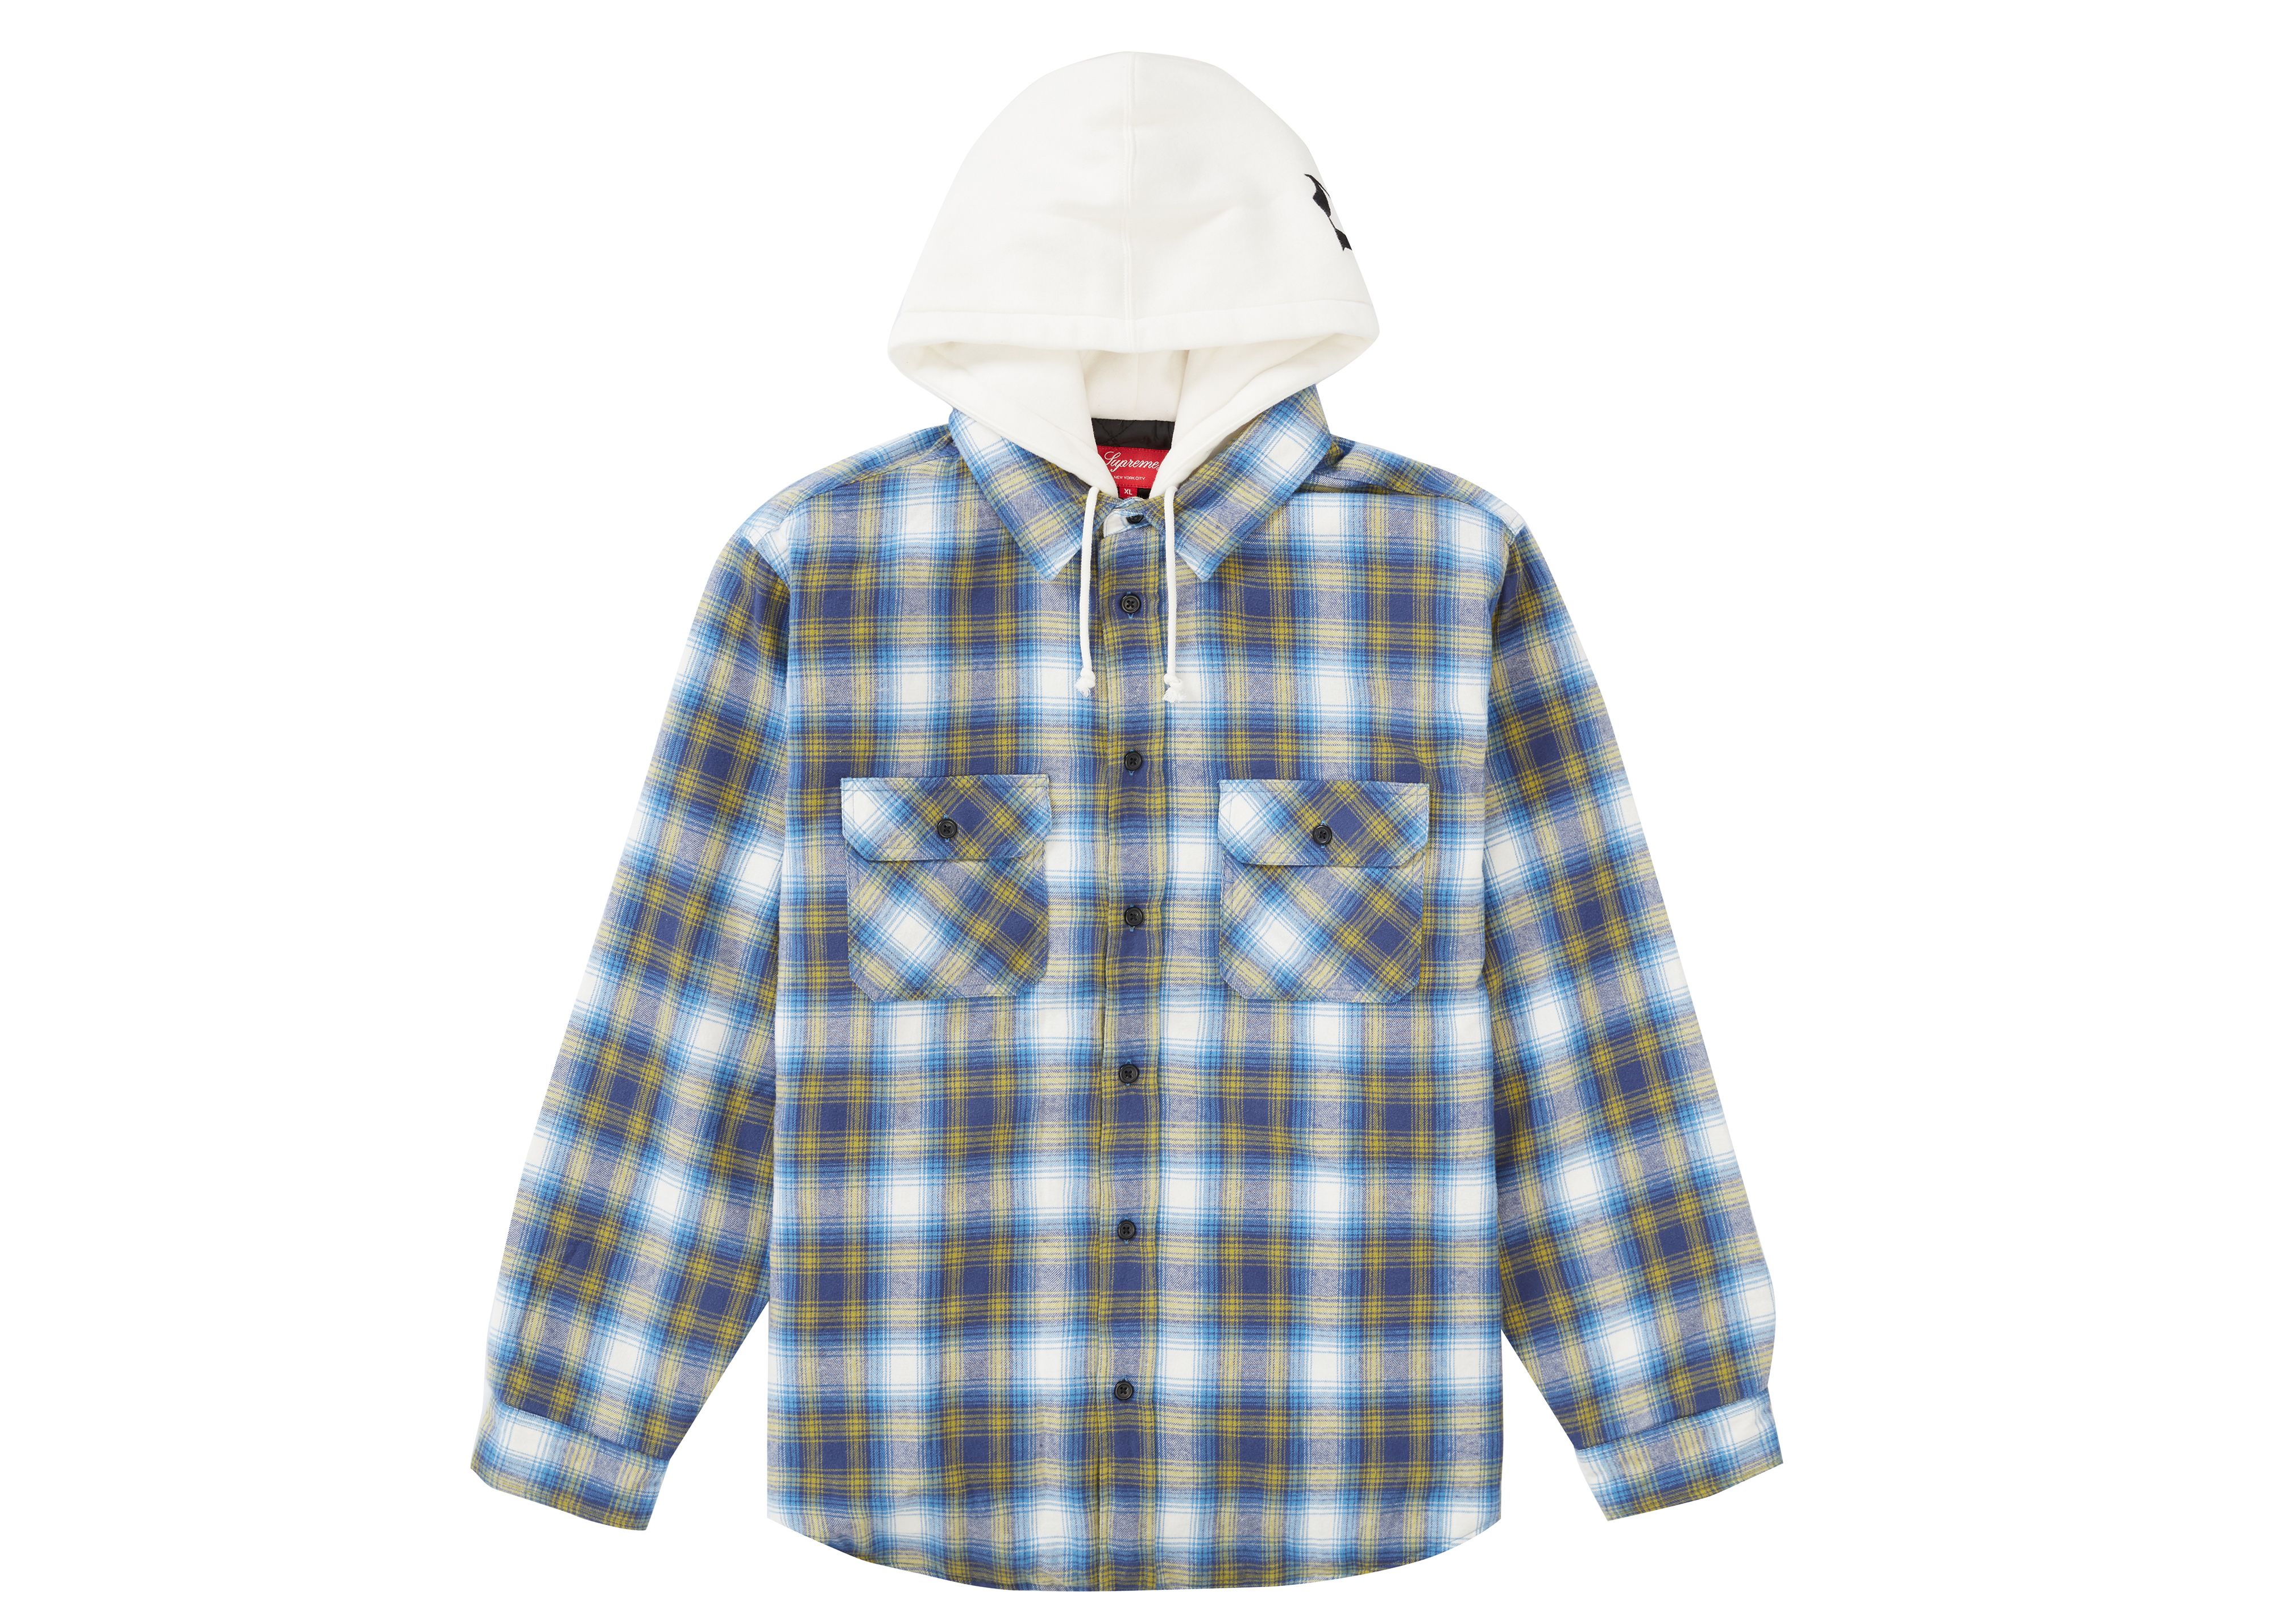 Supreme Hooded Flannel Zip Up Shirt XL-